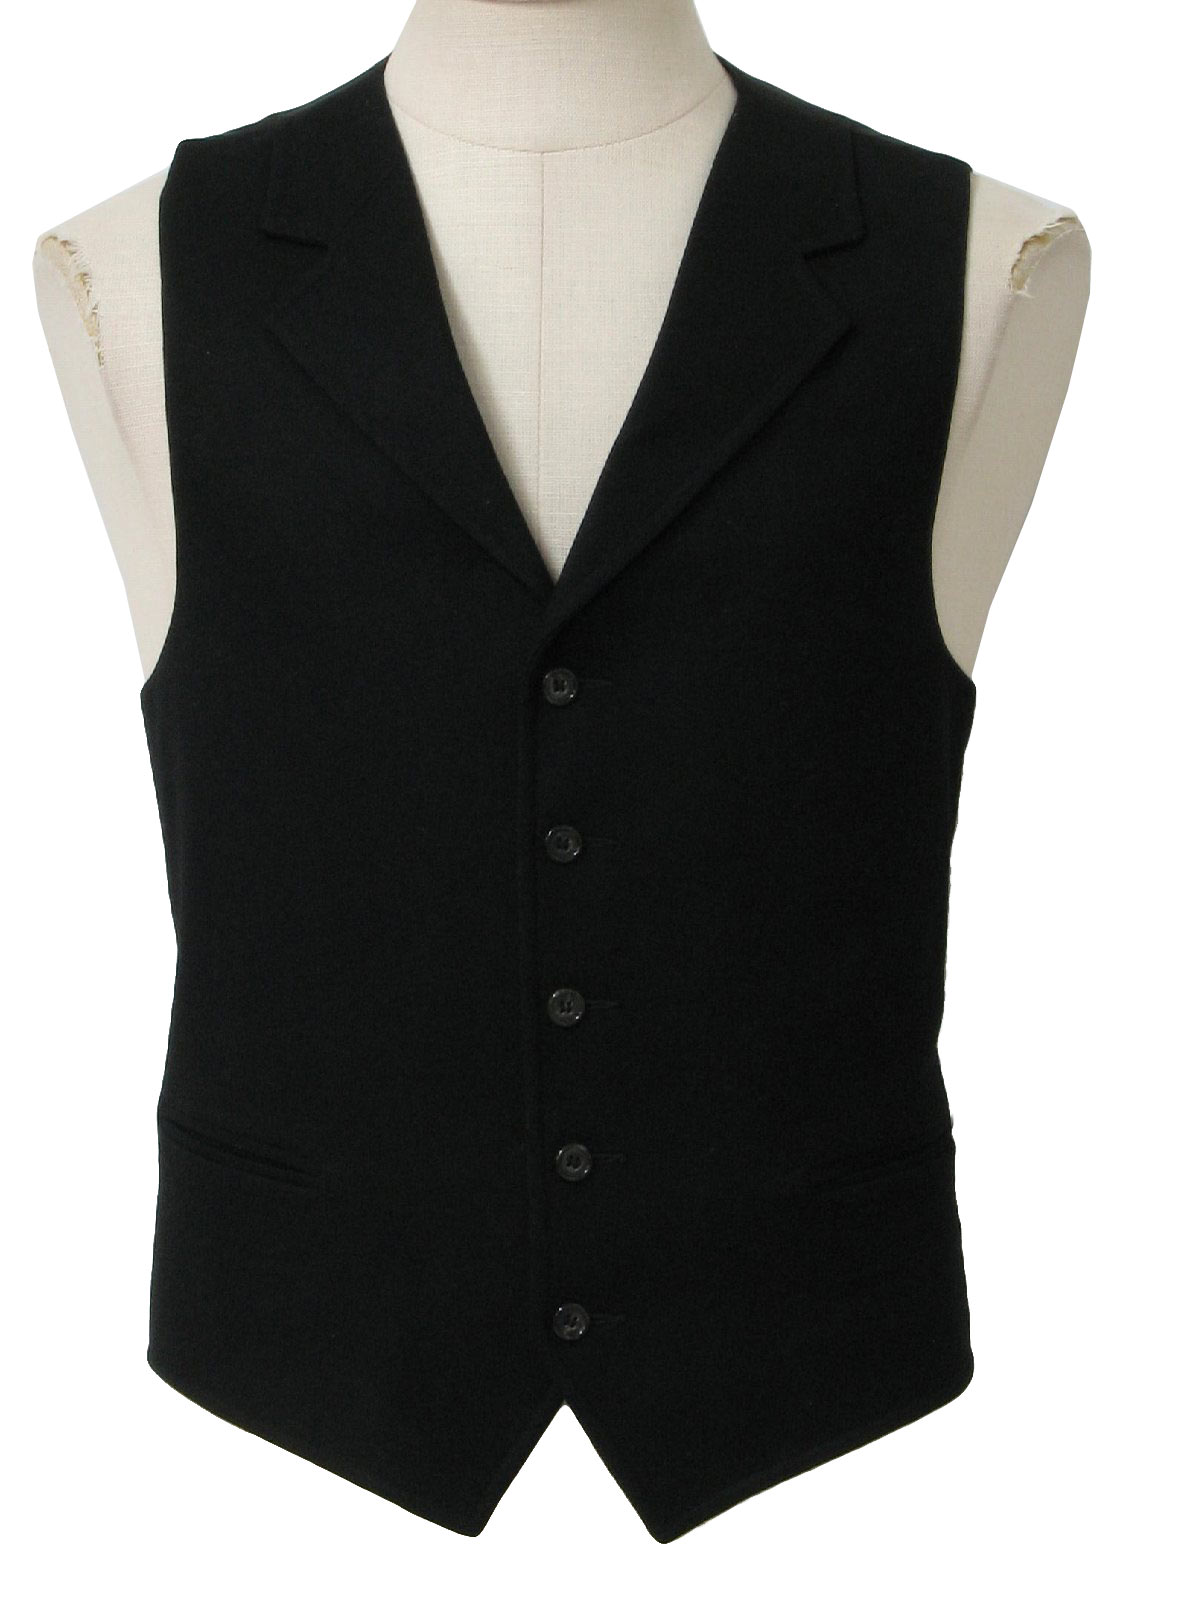 Casual Options 90's Vintage Suit: 90s -Casual Options- Mens black wool ...